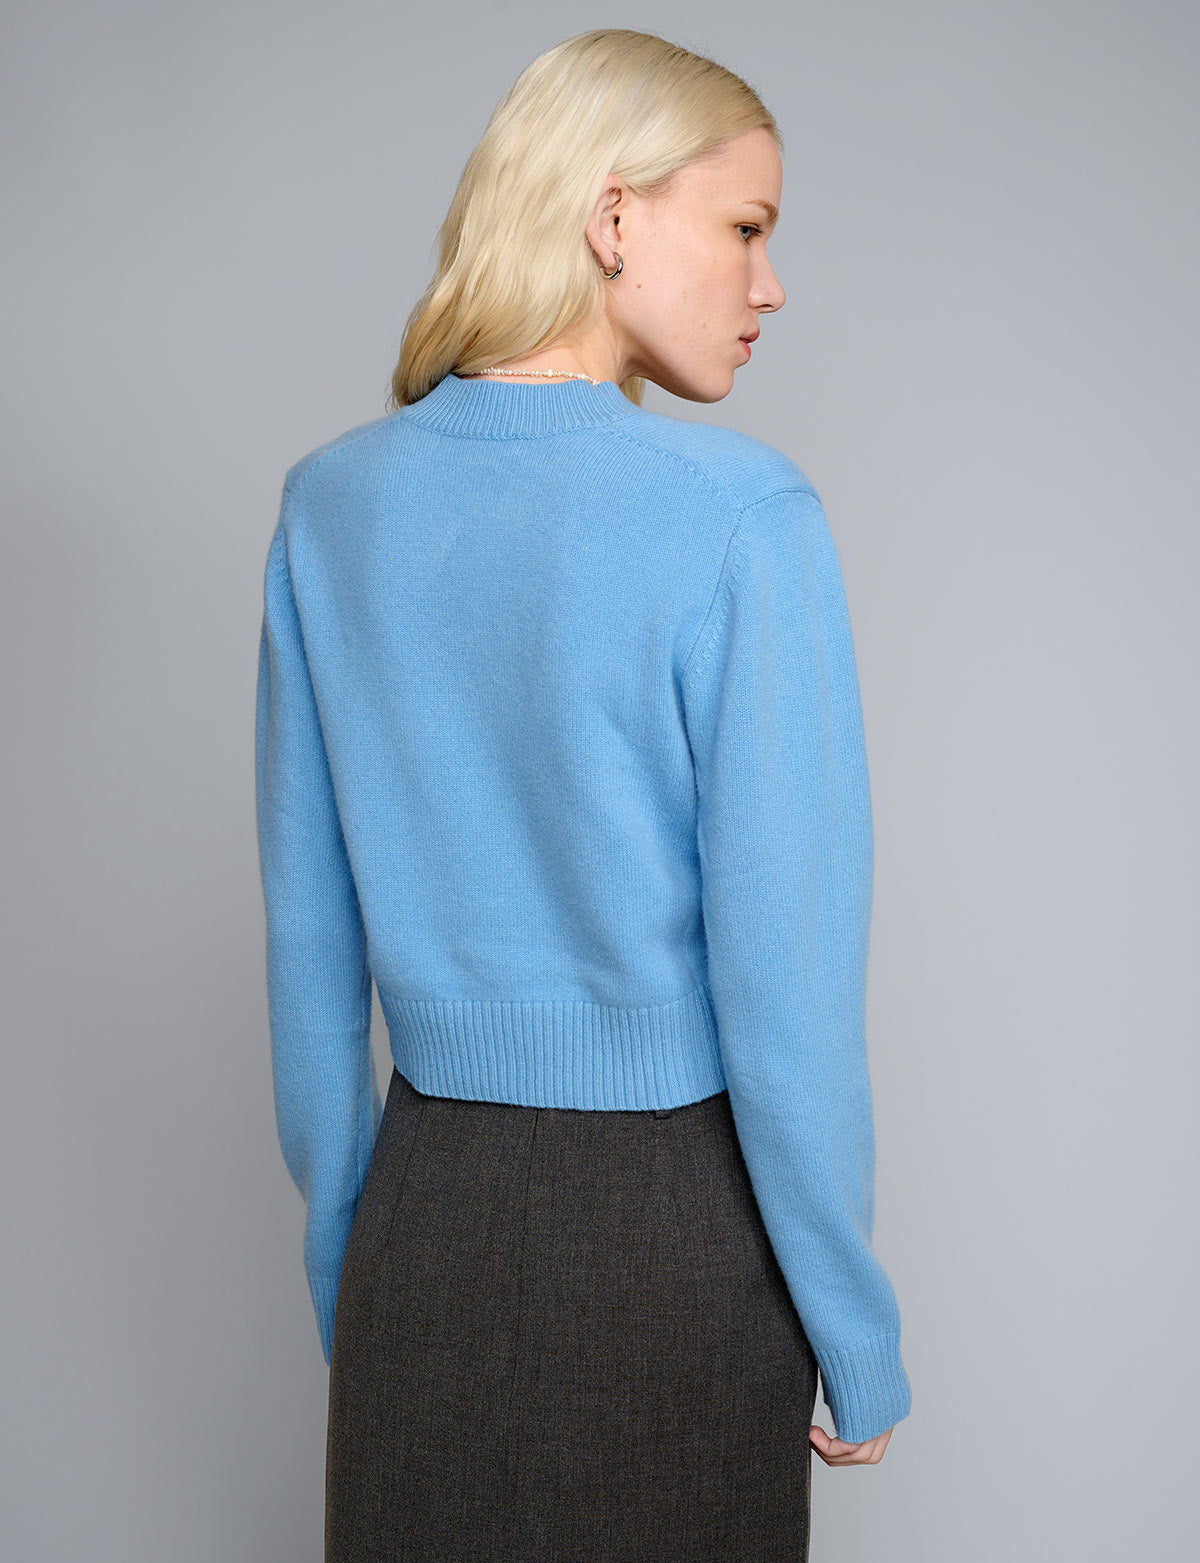 Periwinkle Cropped V-Neck Sweater